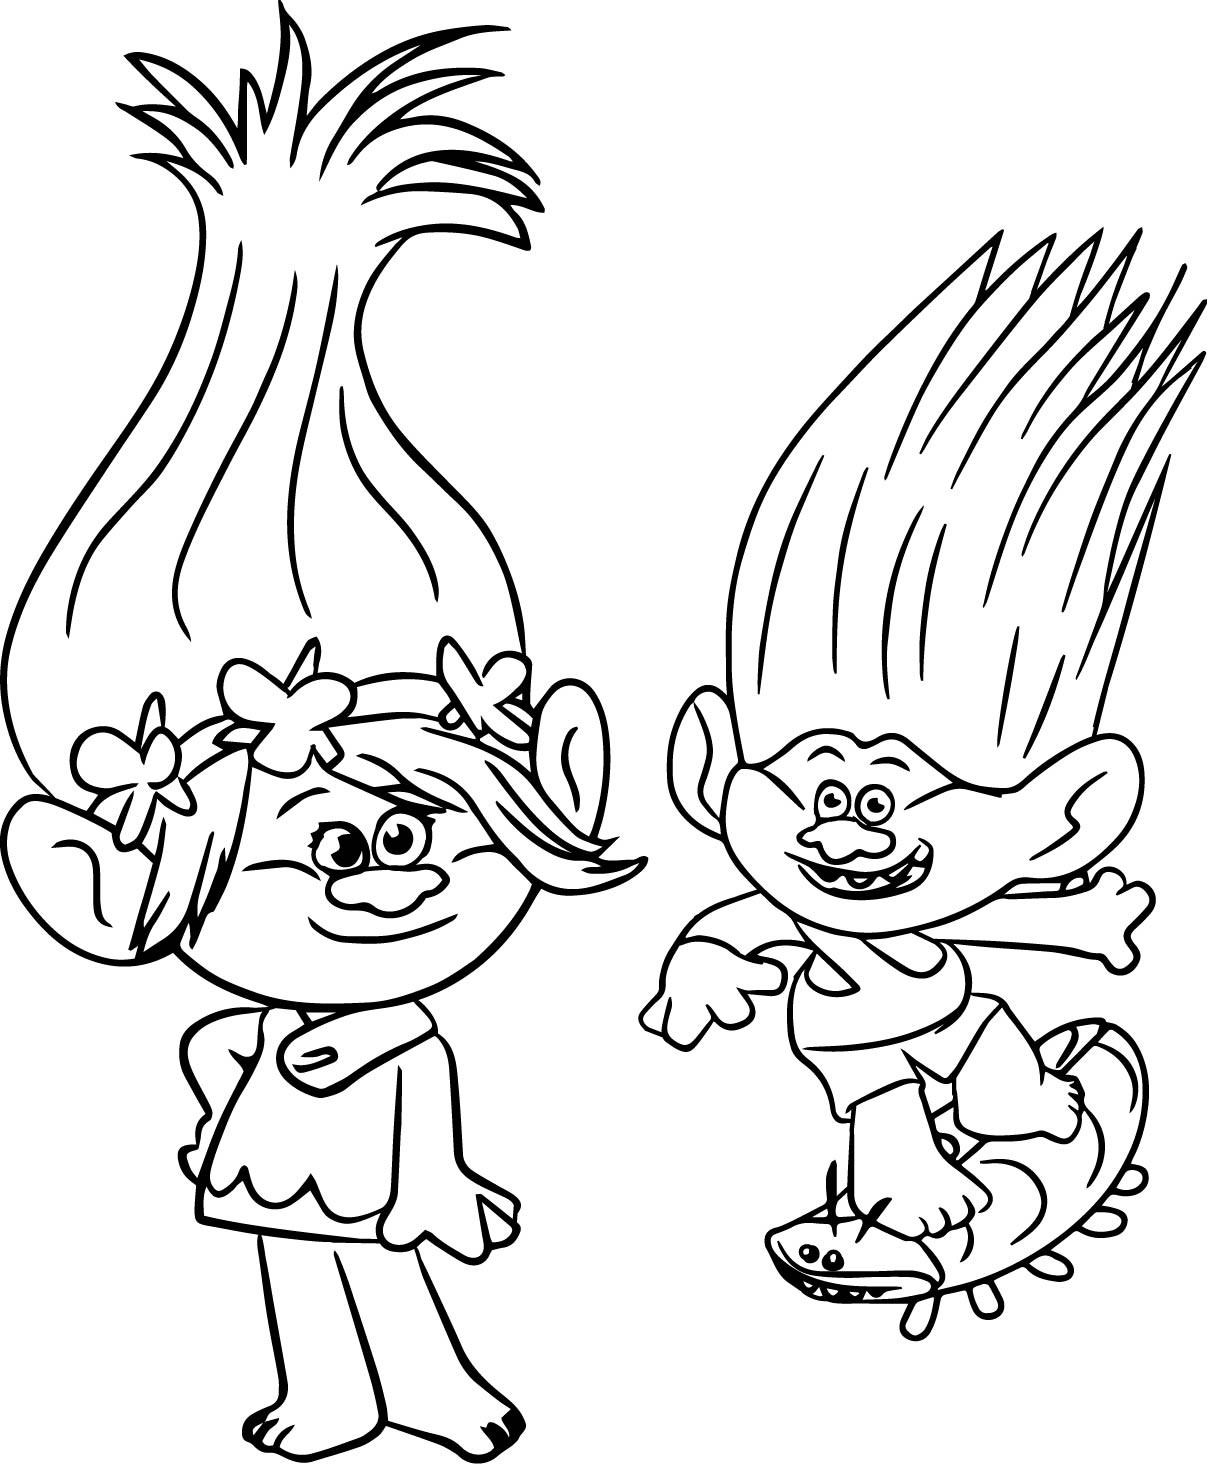 Troll Doll Coloring Page at GetDrawings Free download